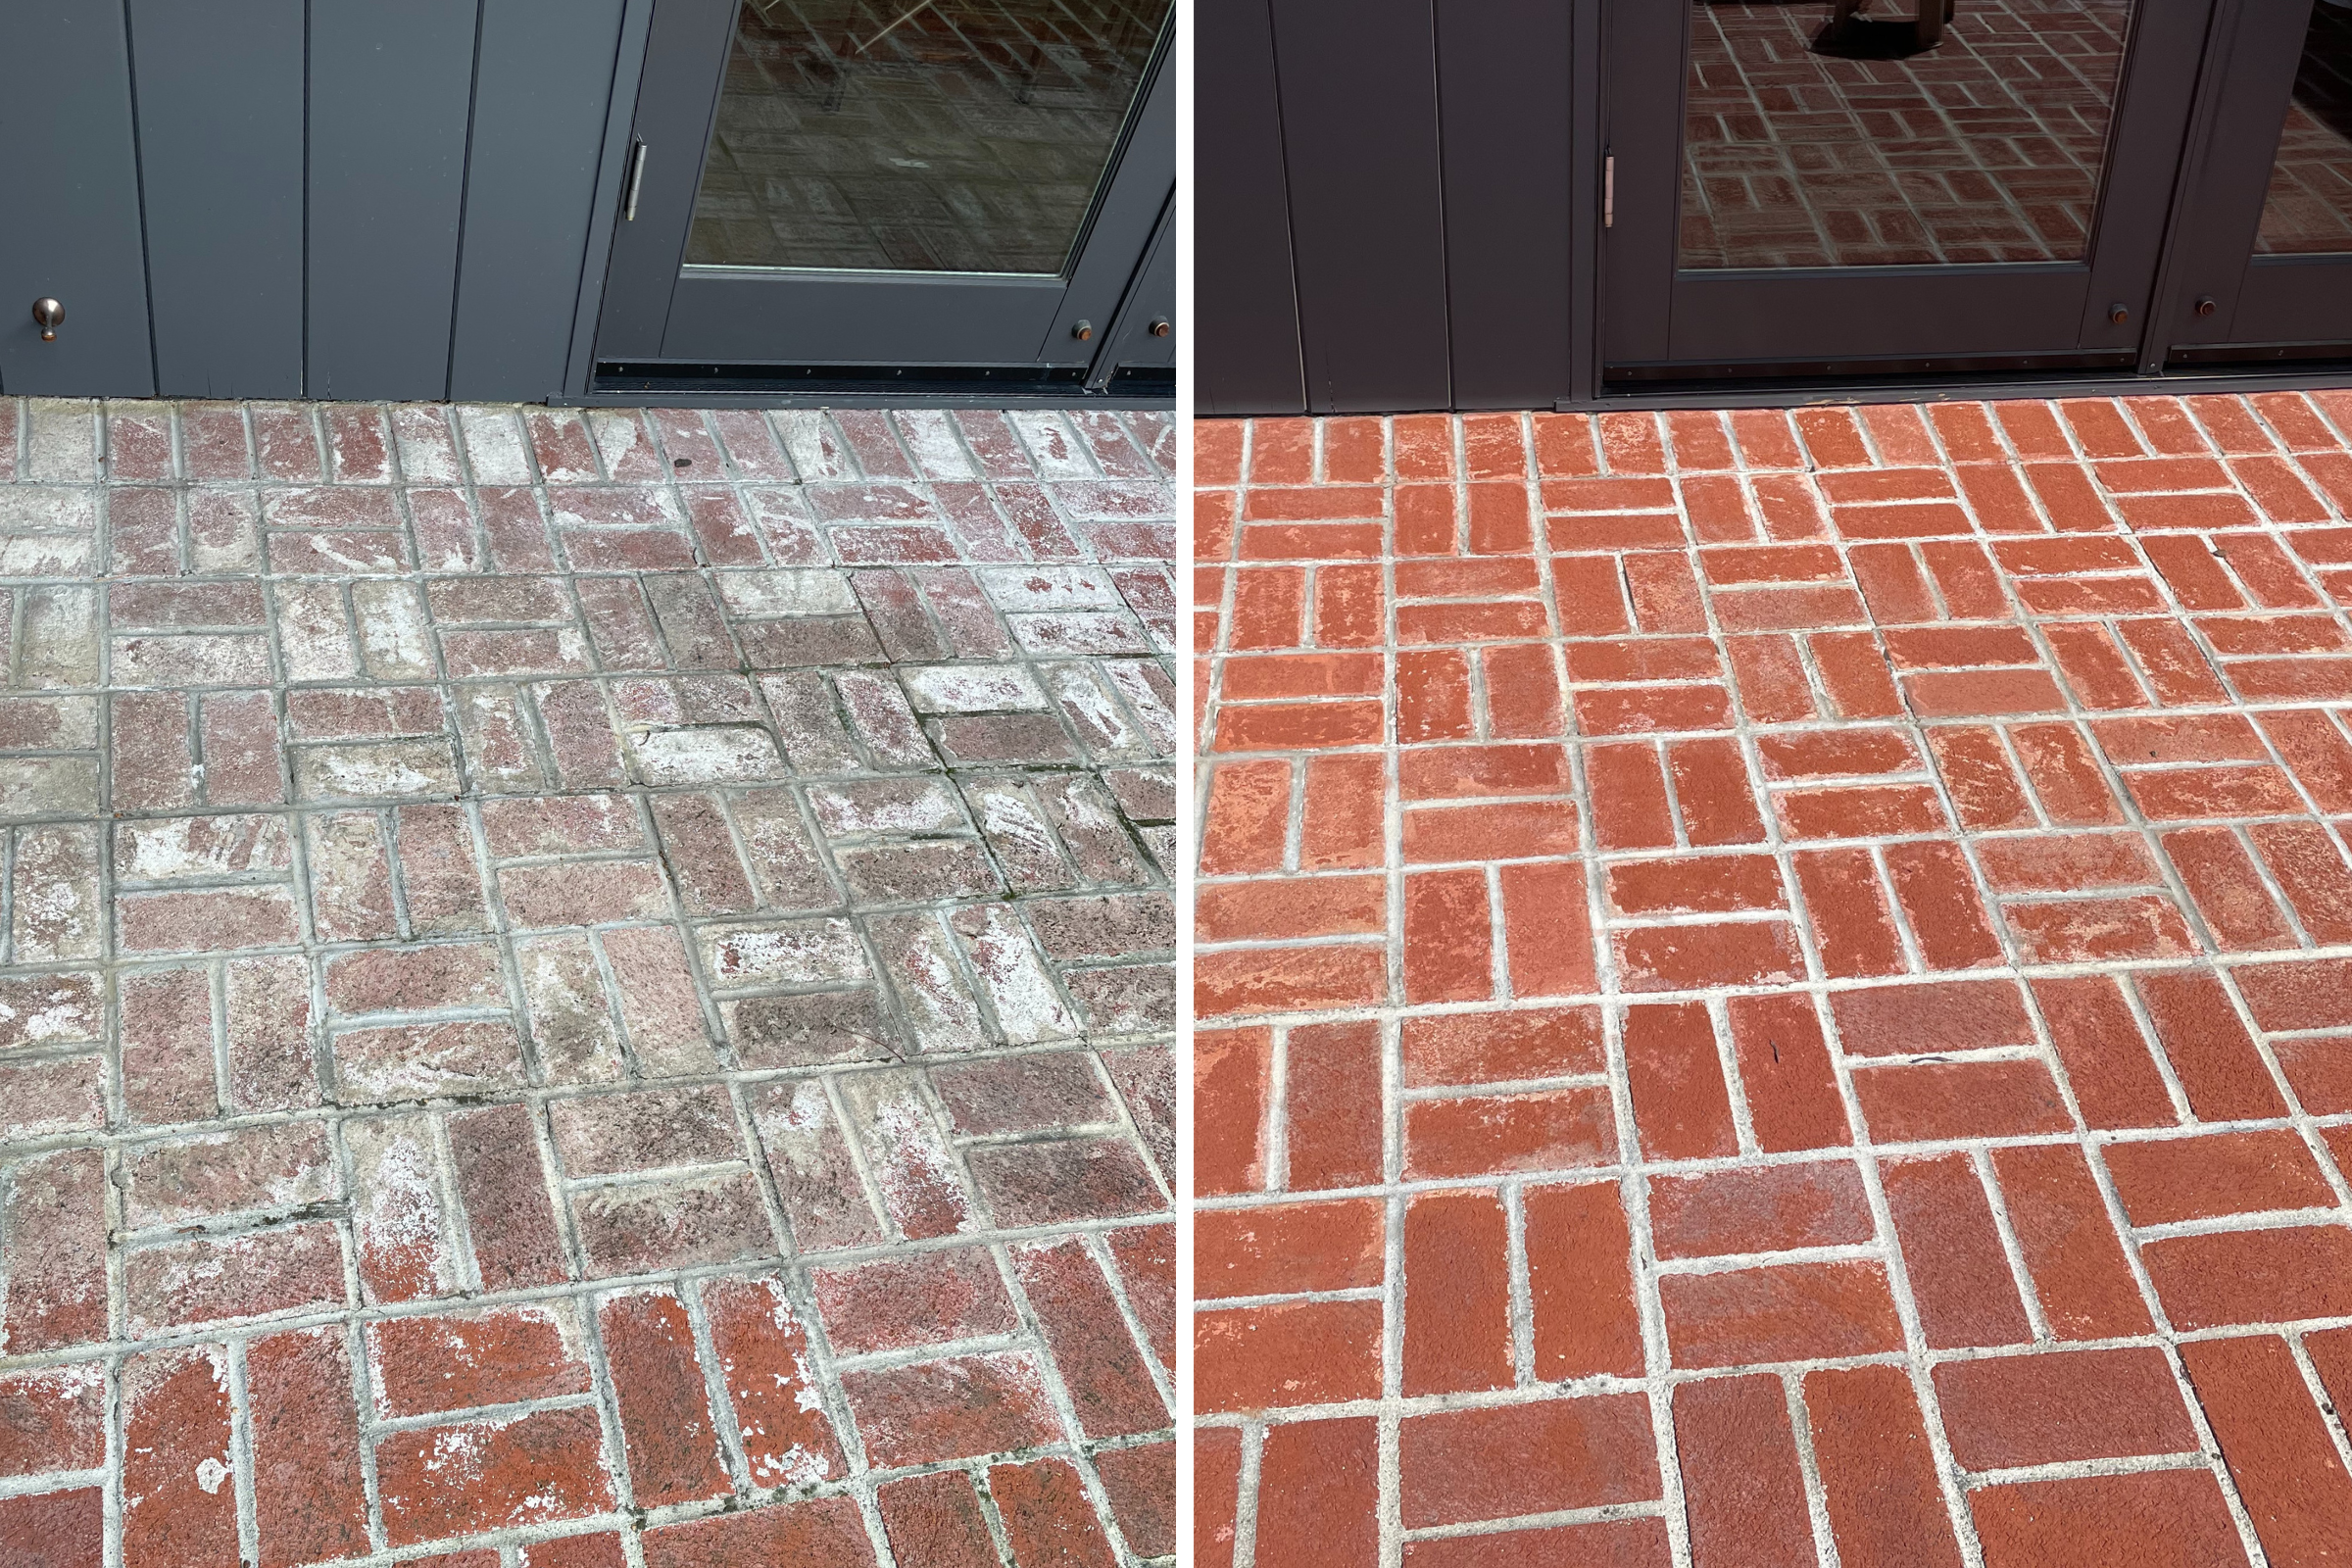 Before and after images of a paver patio restoration. The left side shows the patio with white efflorescence and faded colors. The right side shows the same patio with the efflorescence removed and uniformly colored pavers